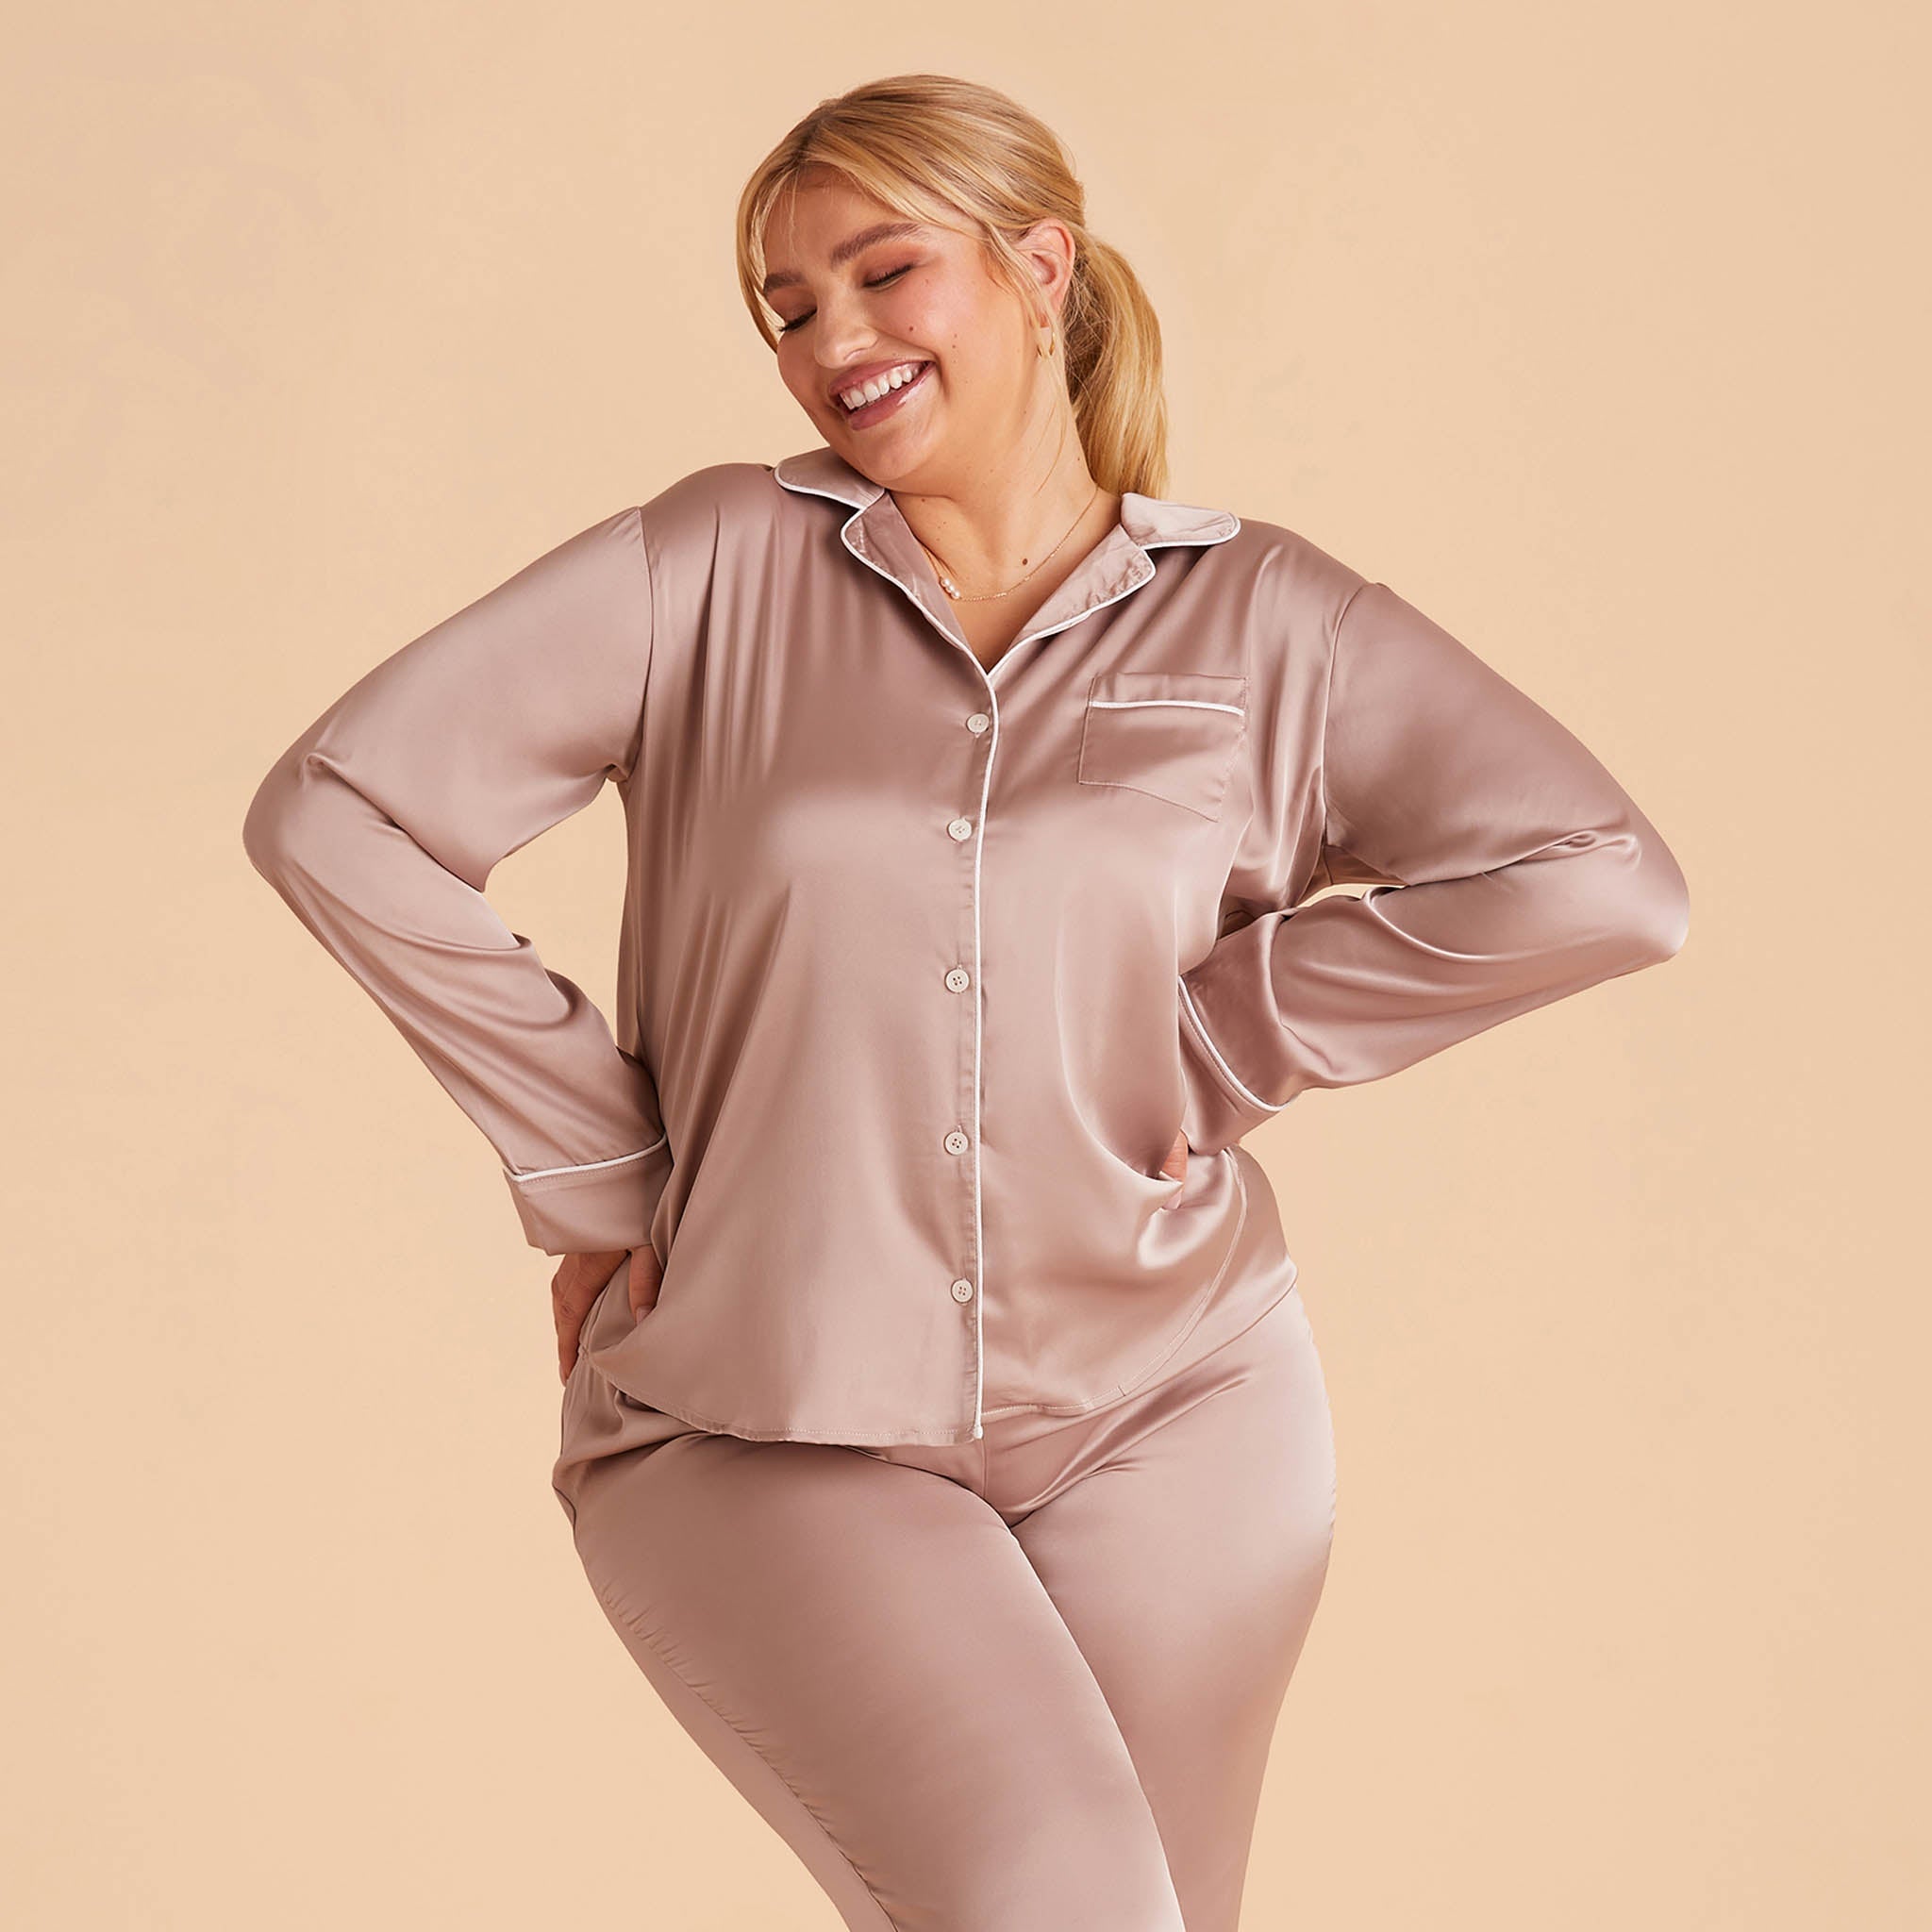 Jonny Plus Size Satin Long Sleeve Pajama Top With White Piping in mauve taupe, front view